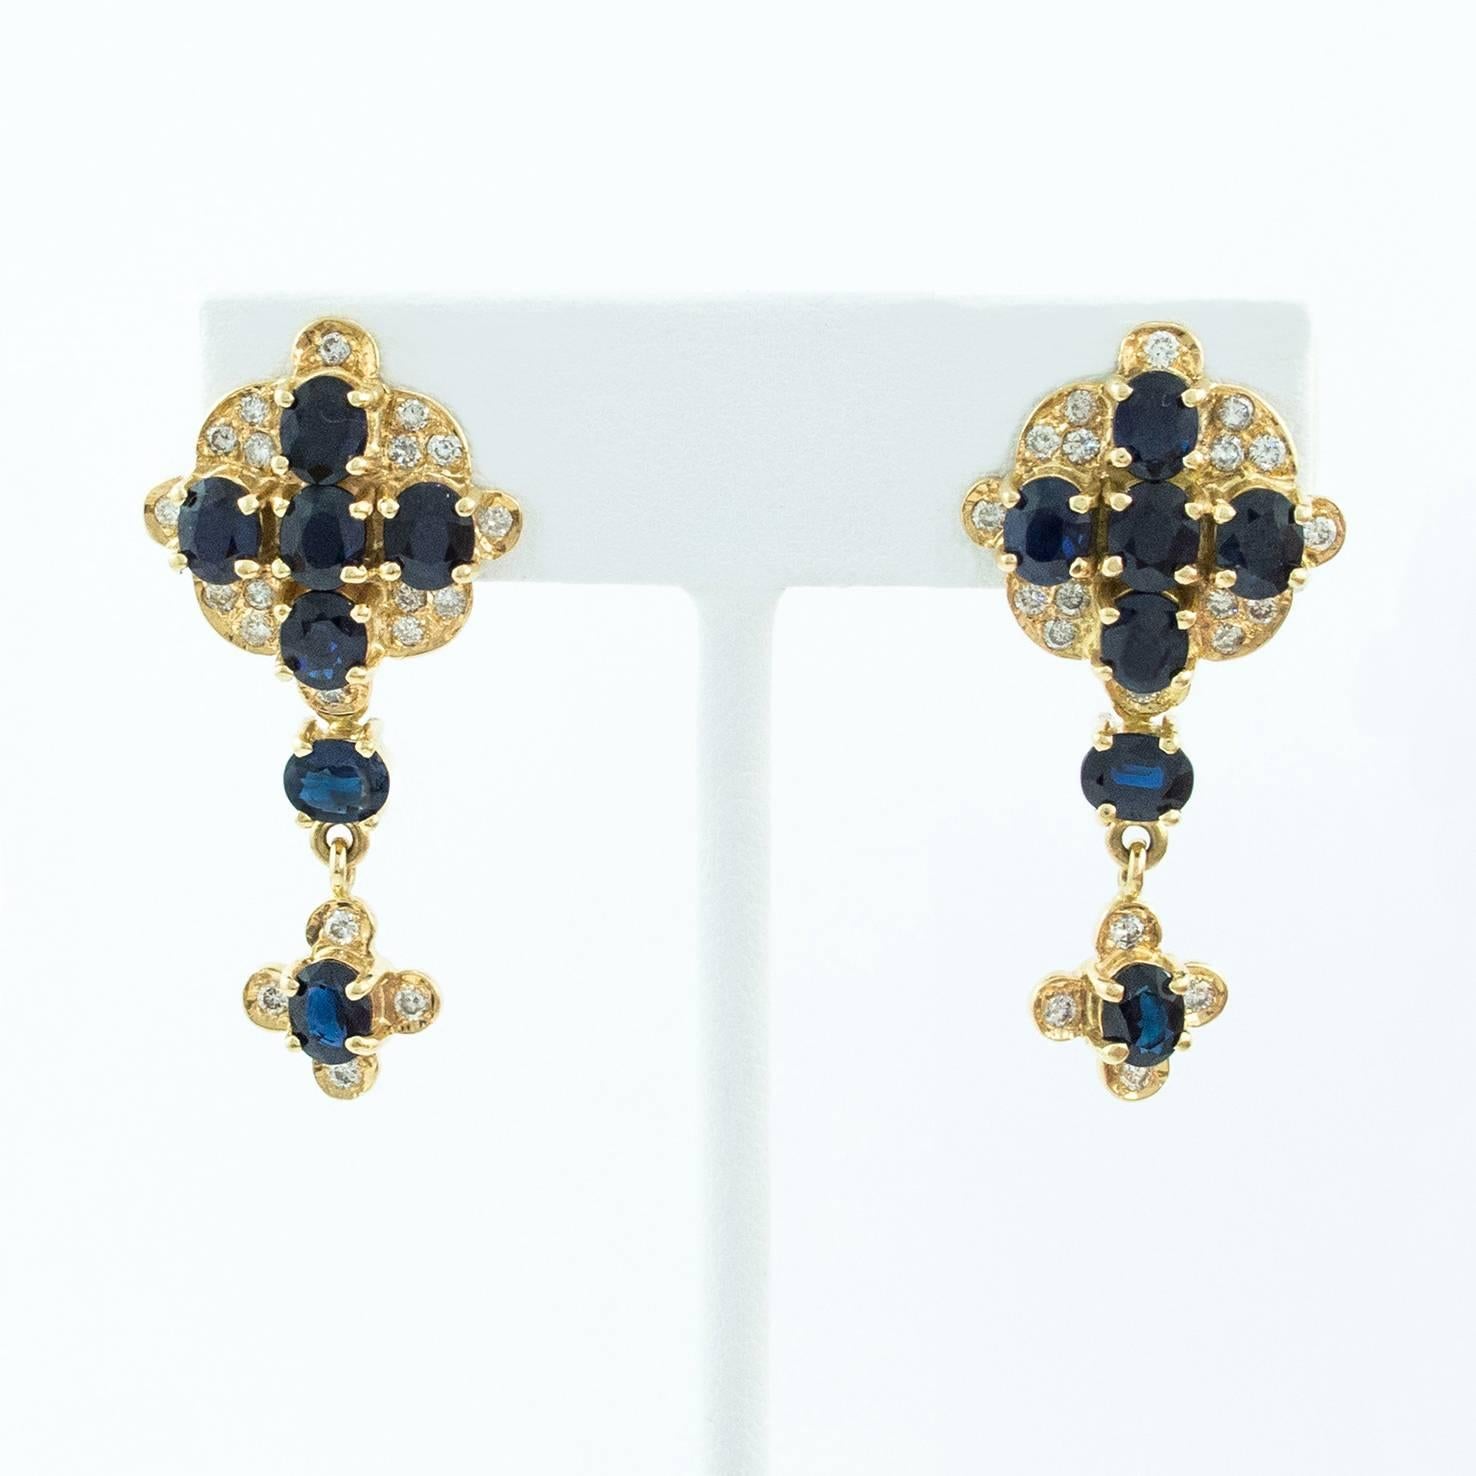 A lovely pair of 14K yellow gold Blue Sapphire and Diamond Gold Cross Drop Earrings. Set with fourteen Oval Faceted natural Blue Sapphires and forty Brilliant cut Diamonds.

The earrings hang 1.75 inches long. The top of the earrings sit well on the